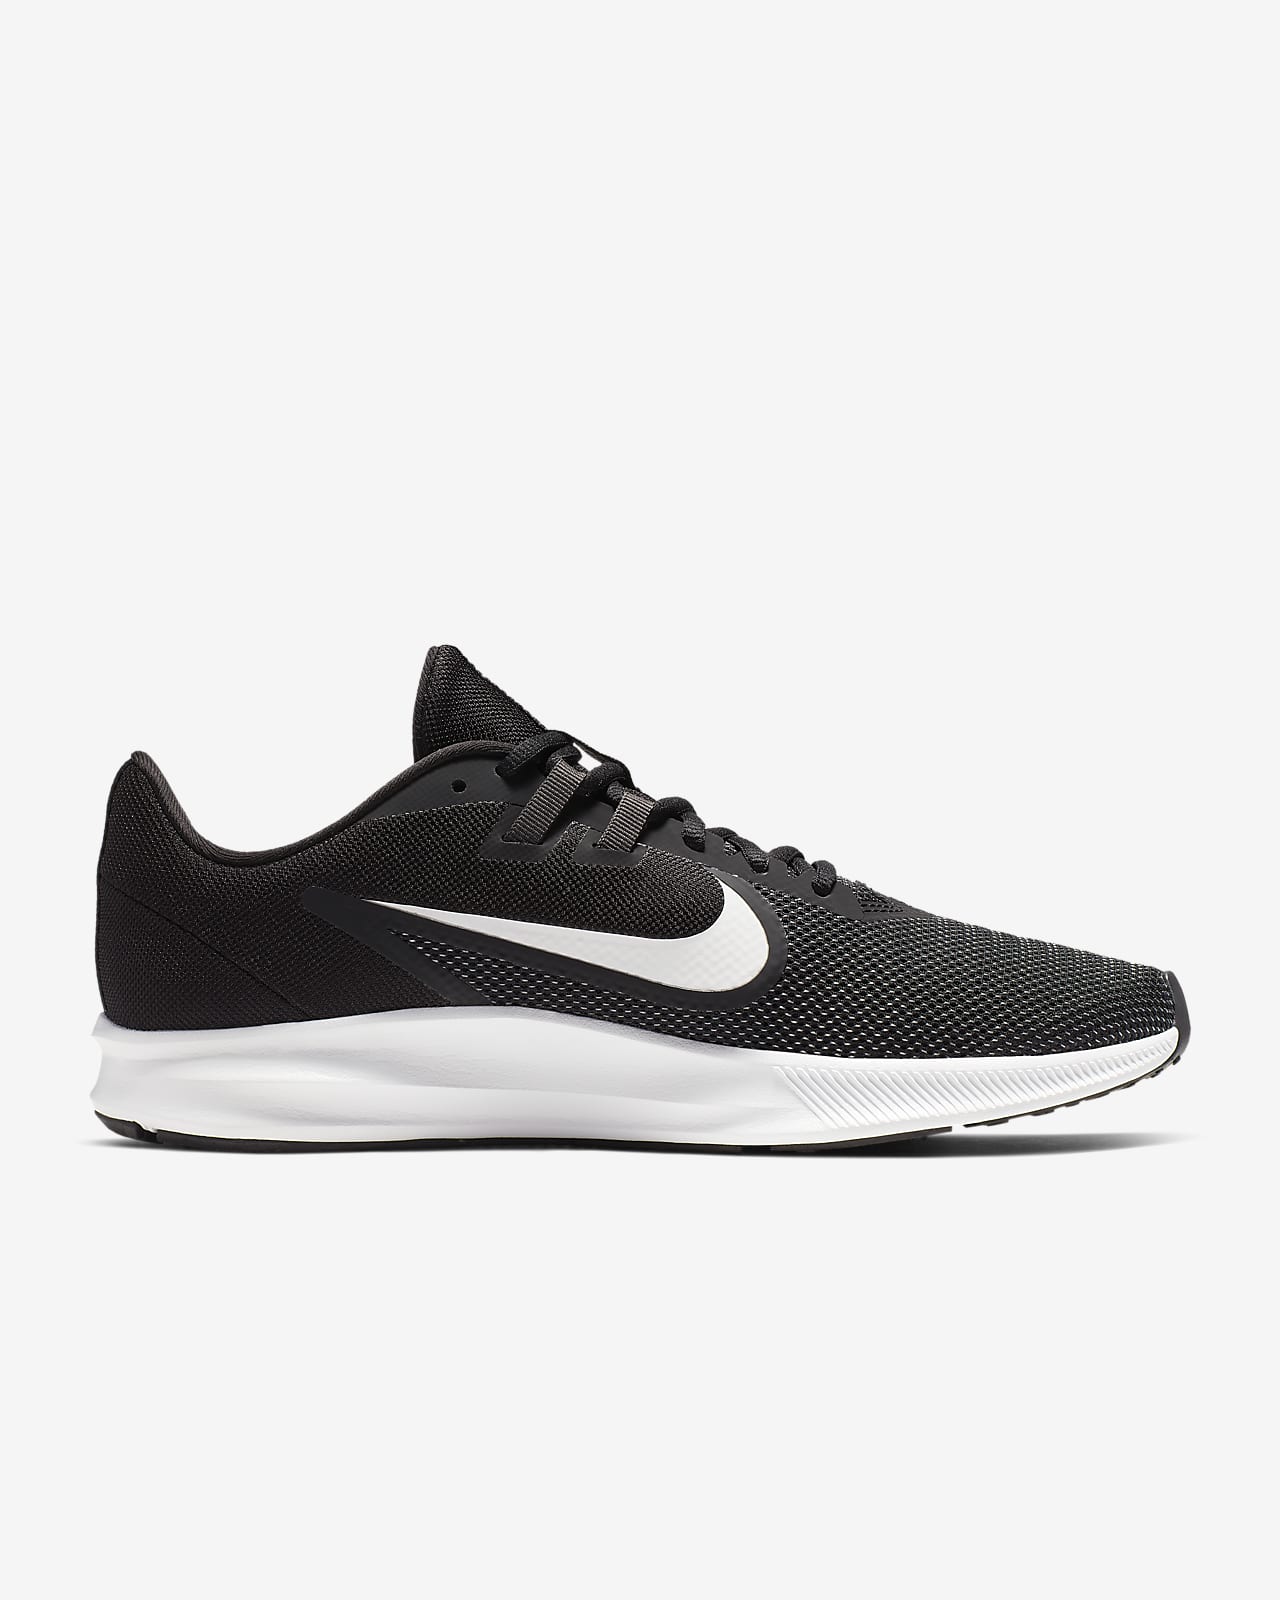 are nike downshifter 9 good for running